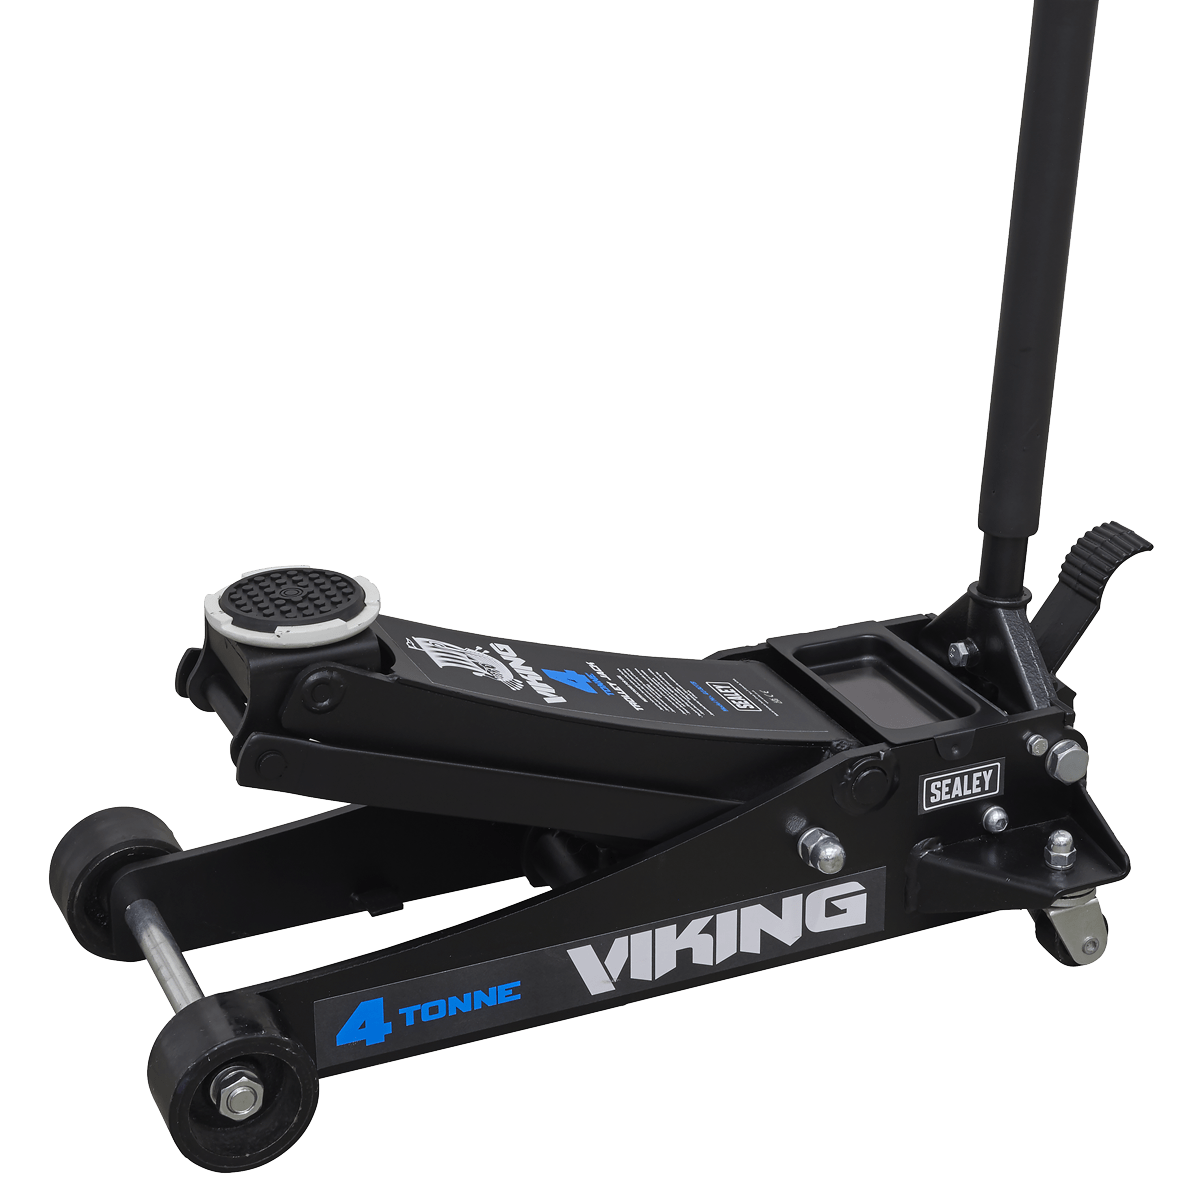 Viking Tyre Bay Trolley Jack 4tonne Low Entry with Rocket Lift | Heavy-duty 10mm gauge steel base design with large jacking pad for greater strength and load stability. | toolforce.ie